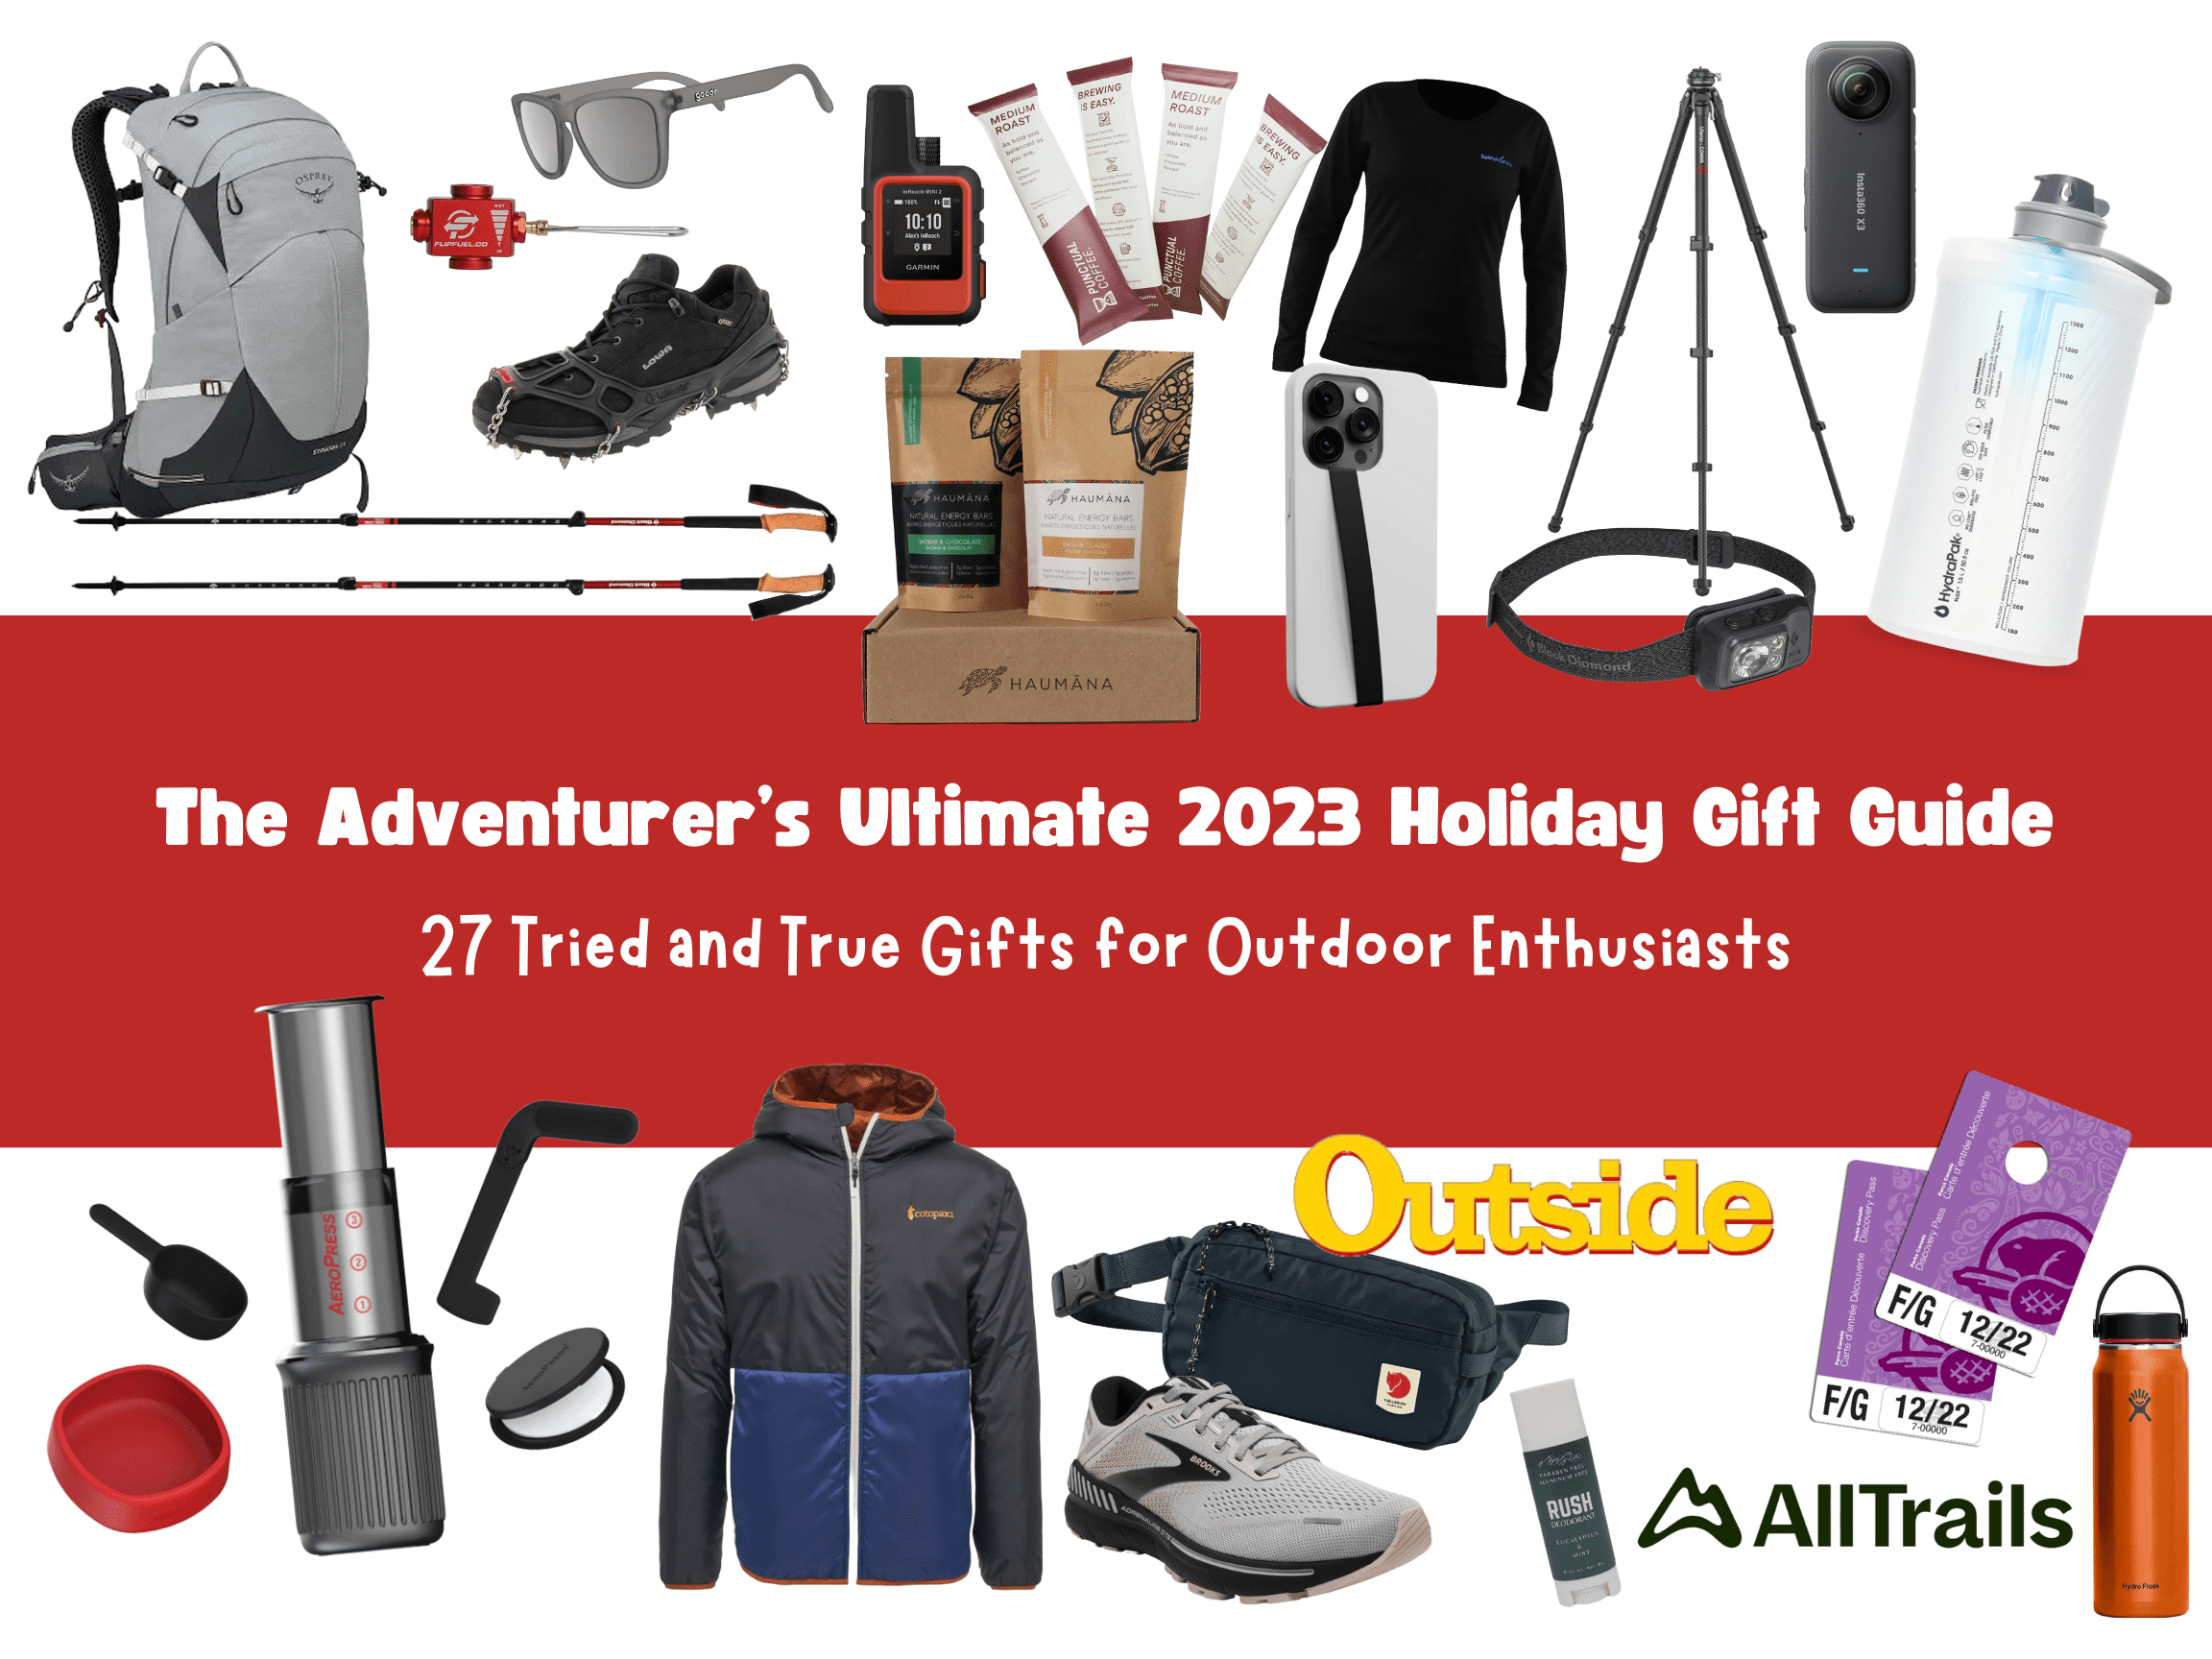 2023 Gift Guide for adventure loving people that will get them outside